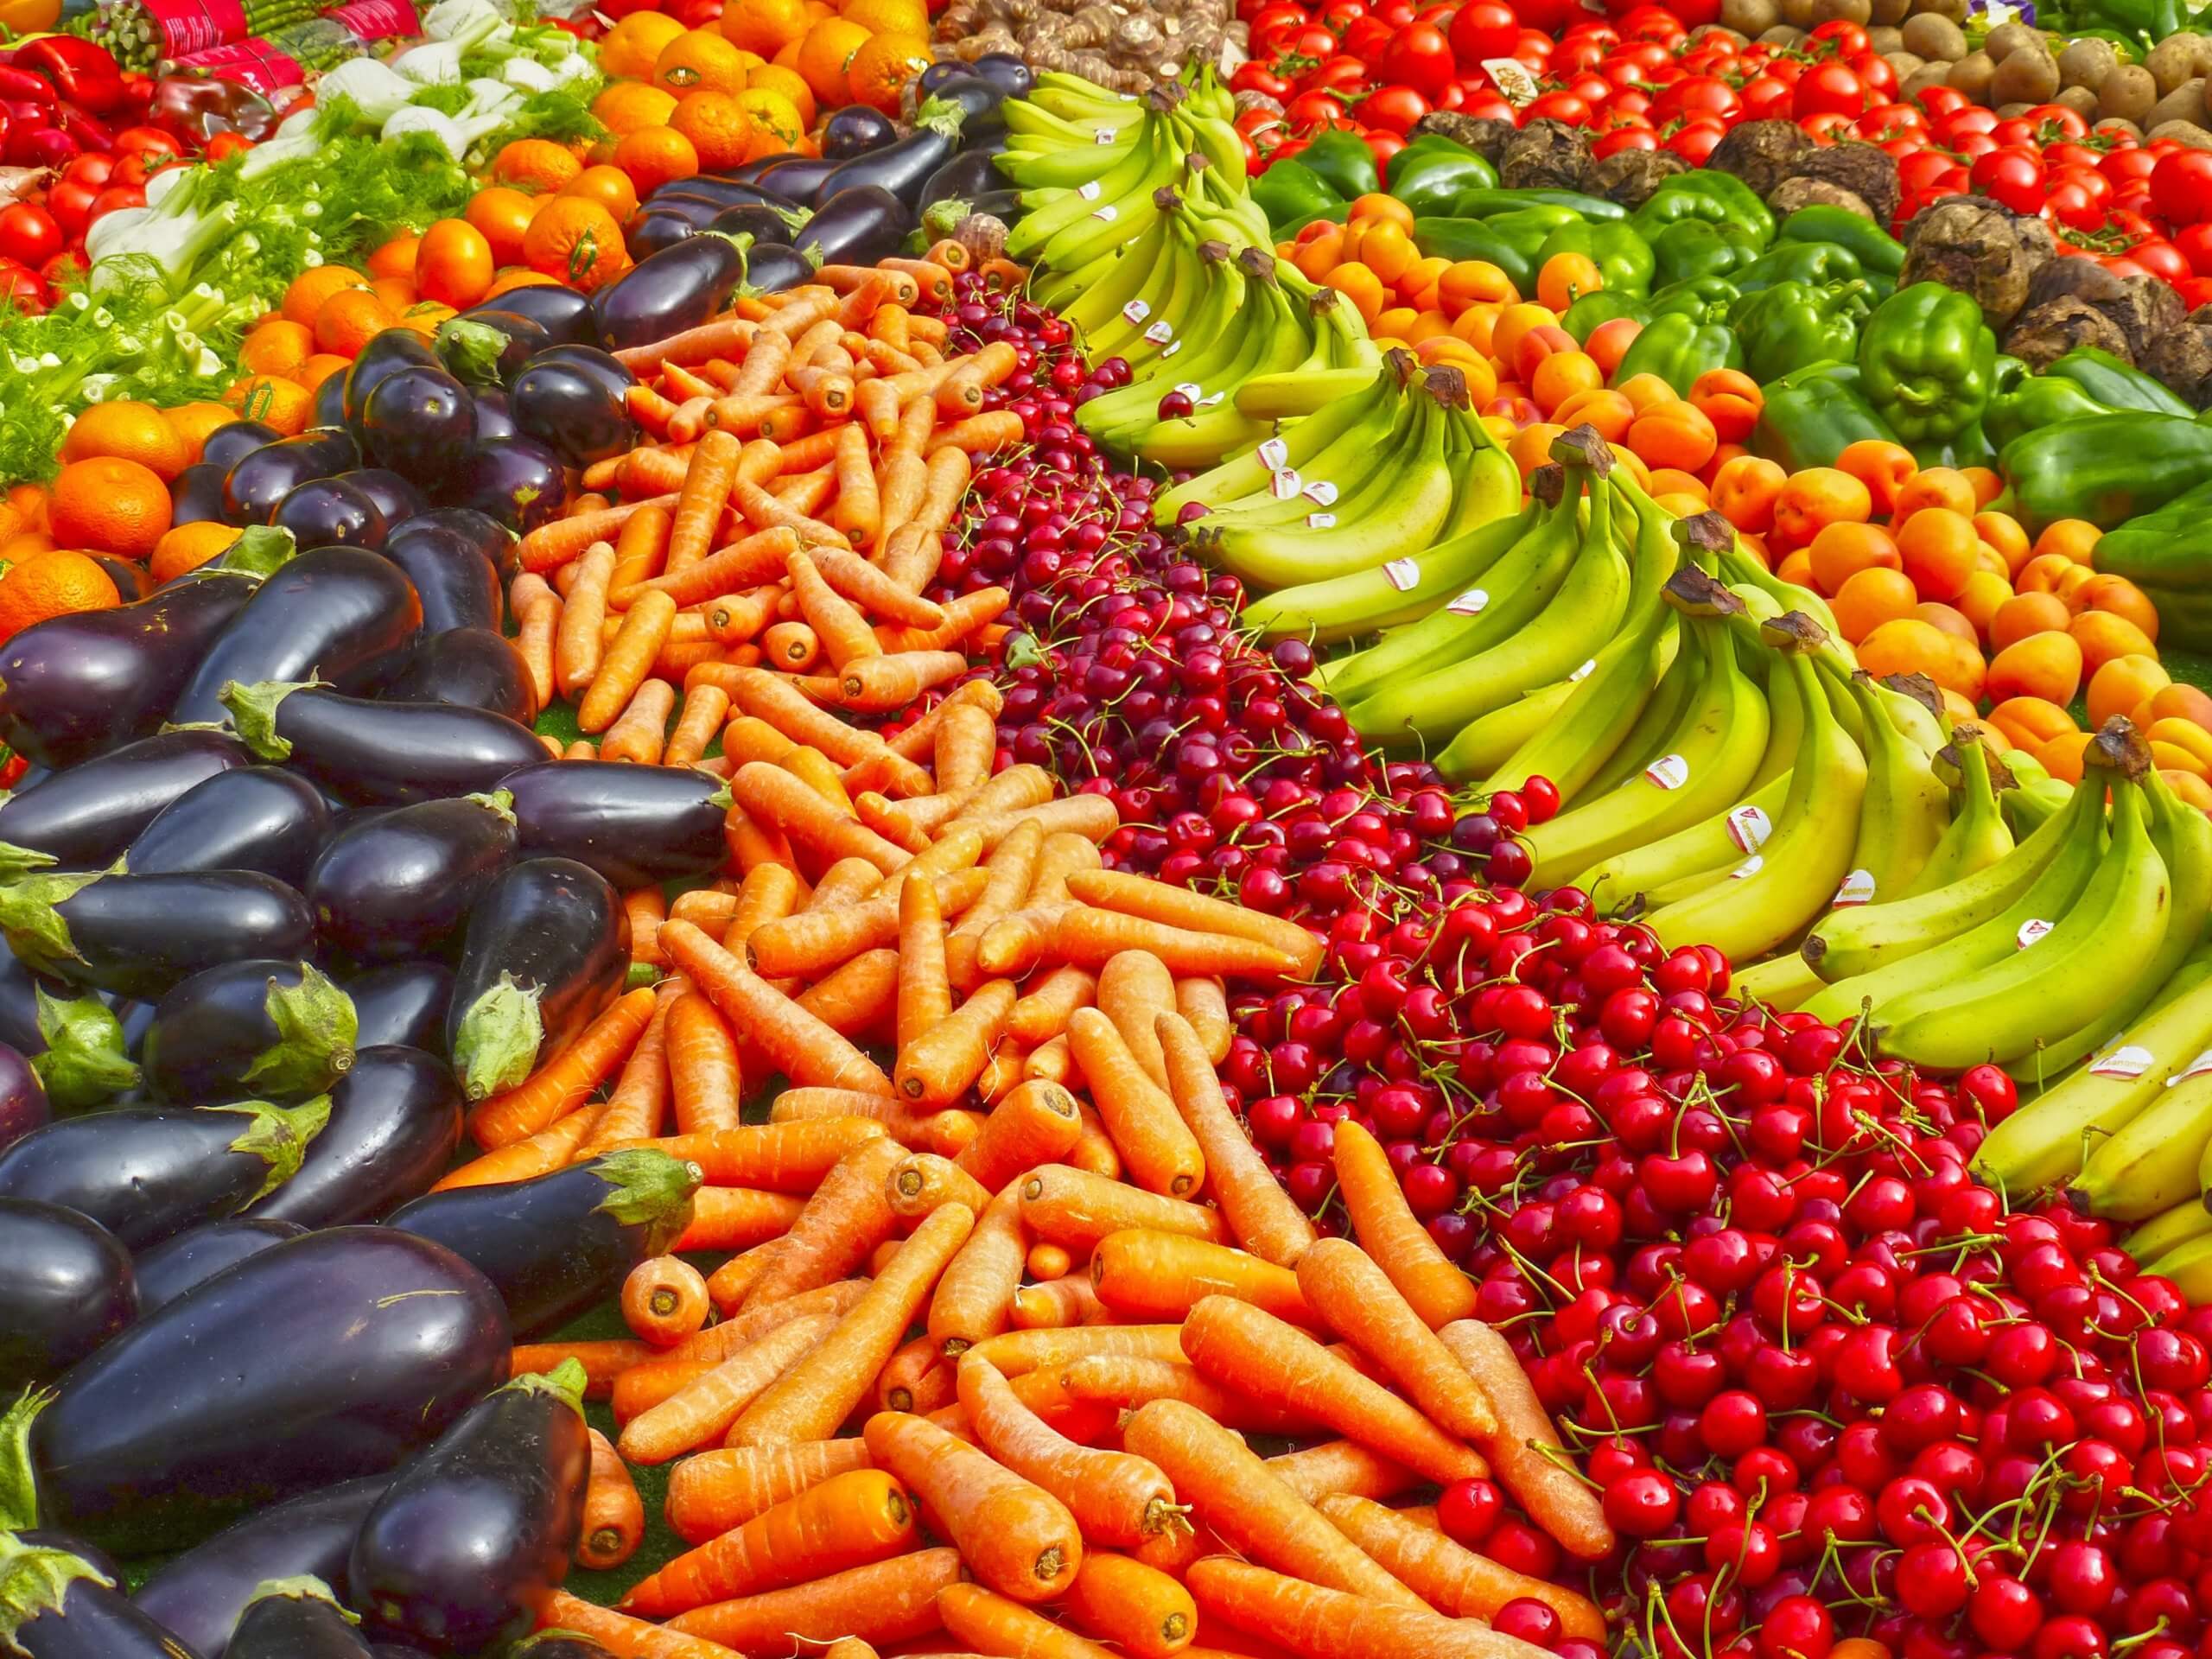 bright colored, fresh produce- eggplant, carrots, cherries, bananas, oranges, green bell peppers